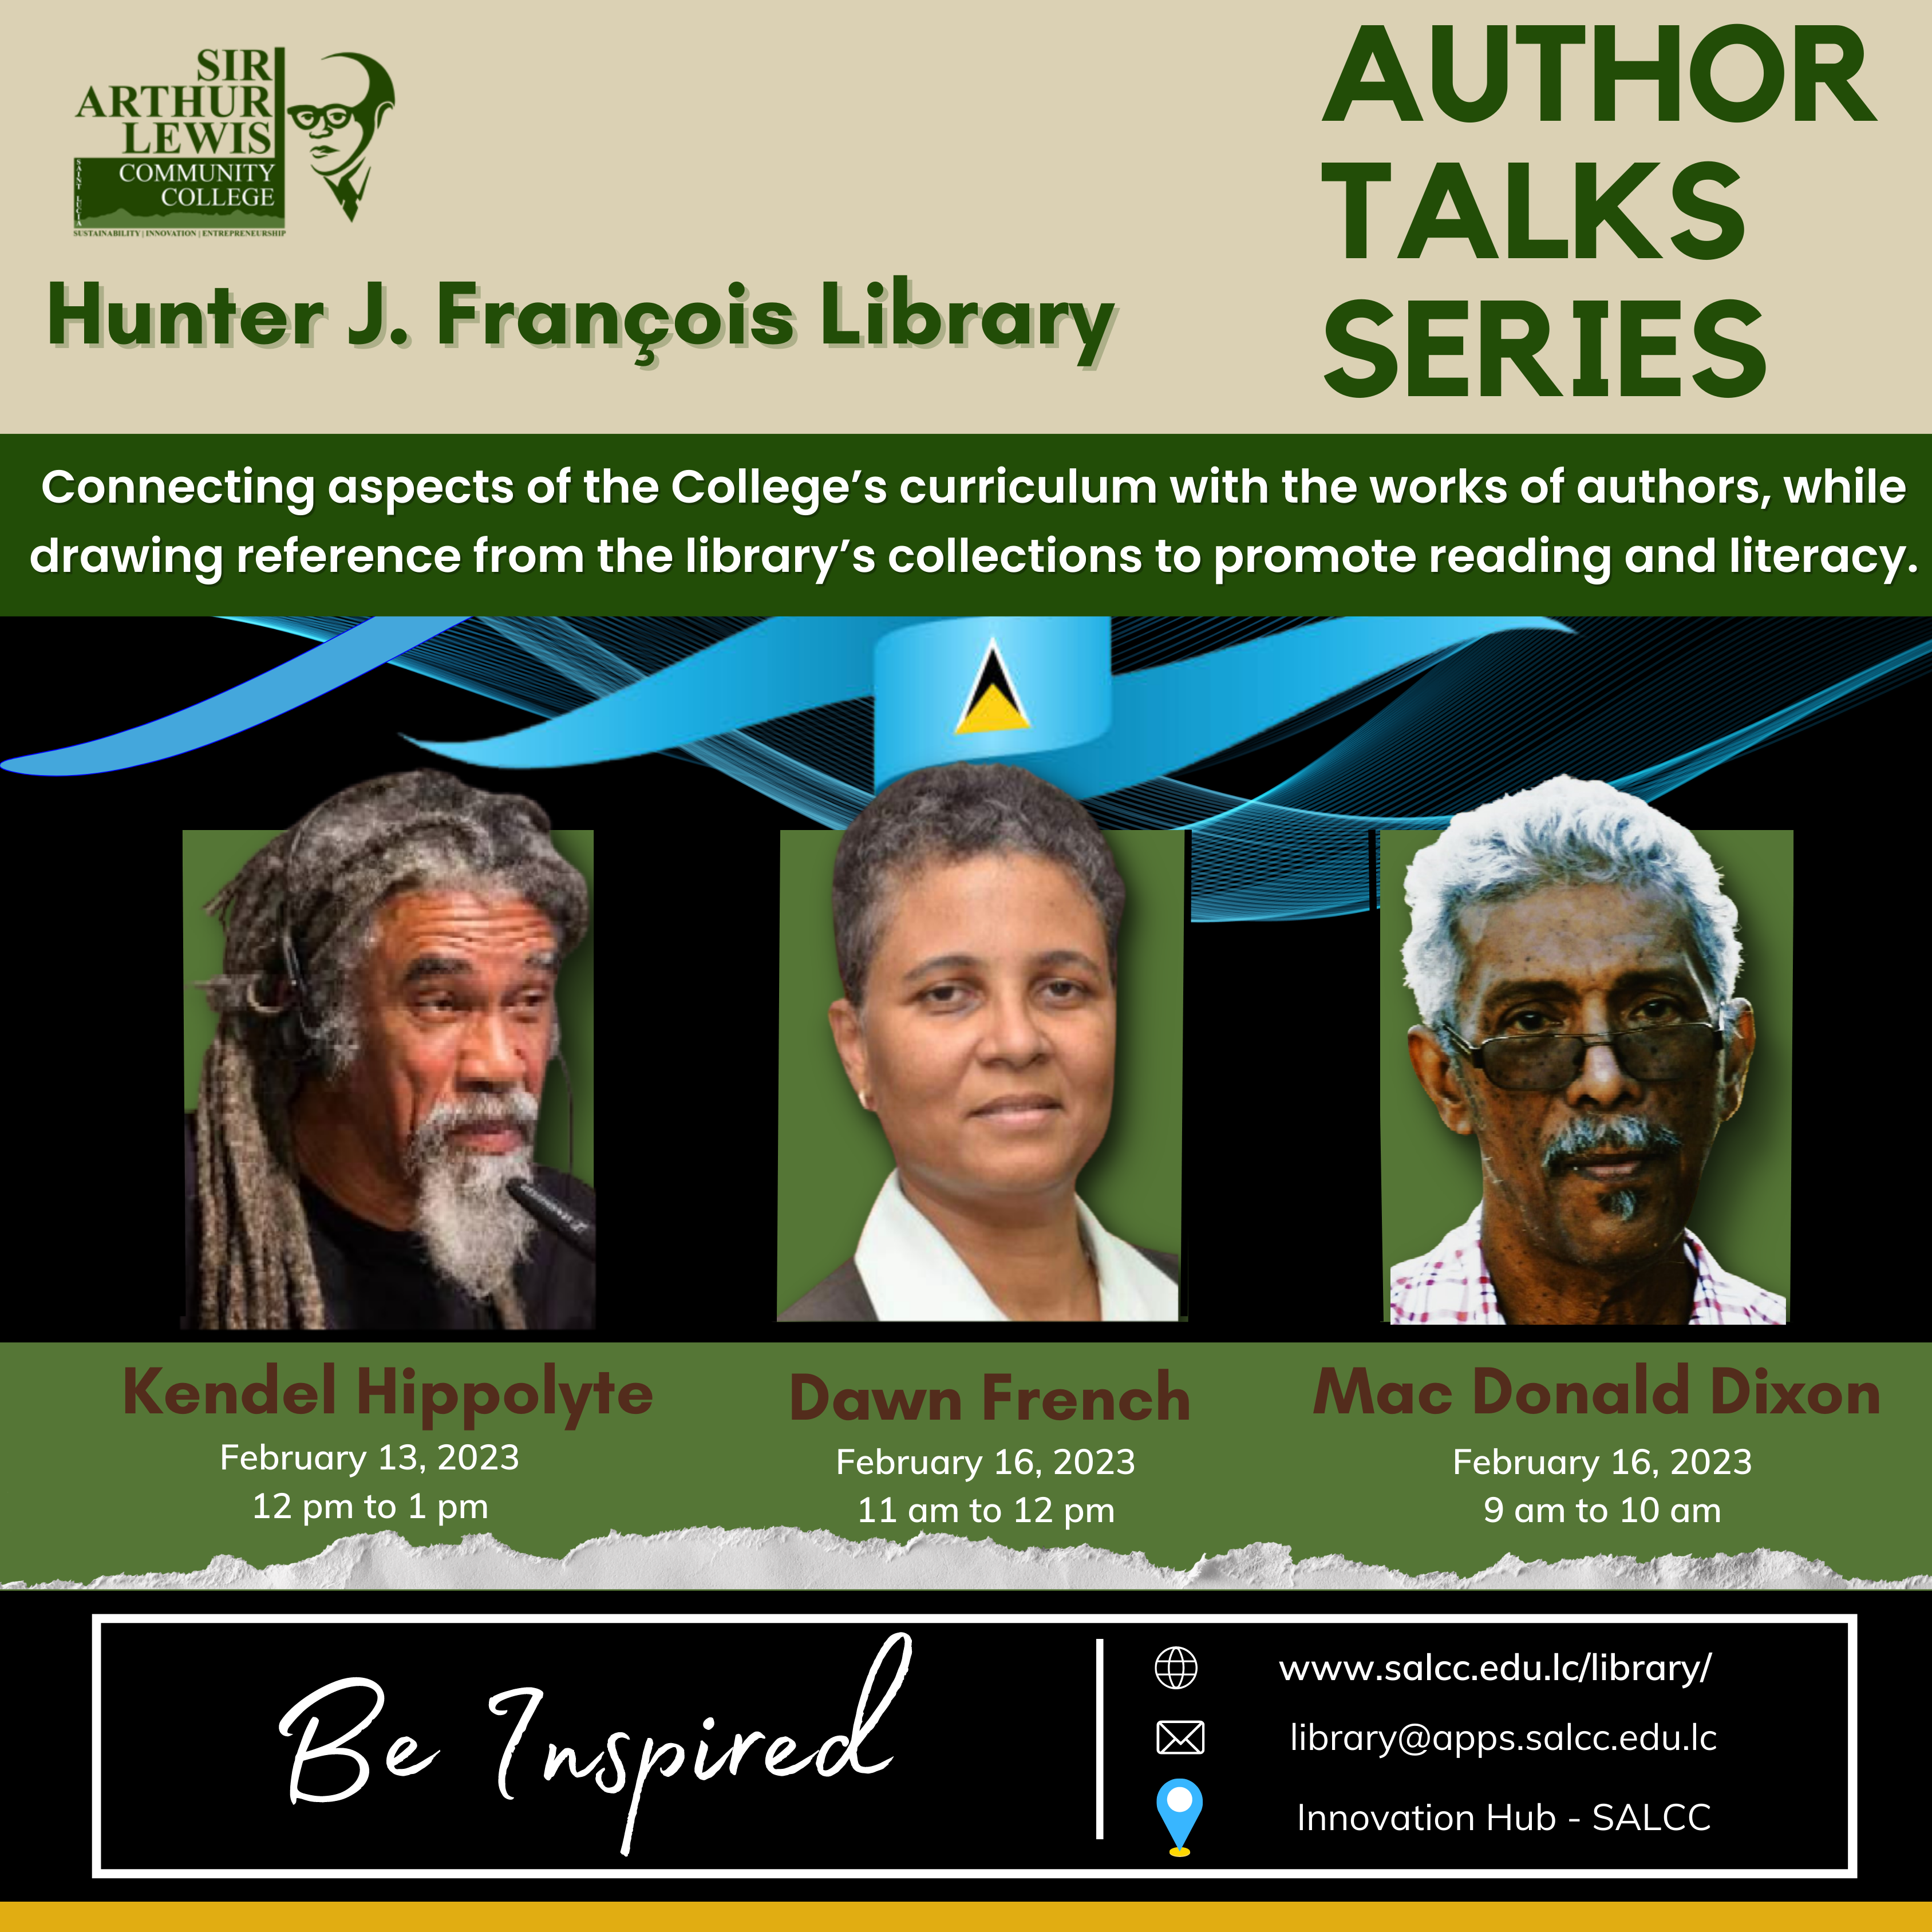 The Hunter J. François Library hosts the first installment of its new AUTHOR TALKS series. featuring Kendel Hippolyte, Dawn French and McDonald Dixon.